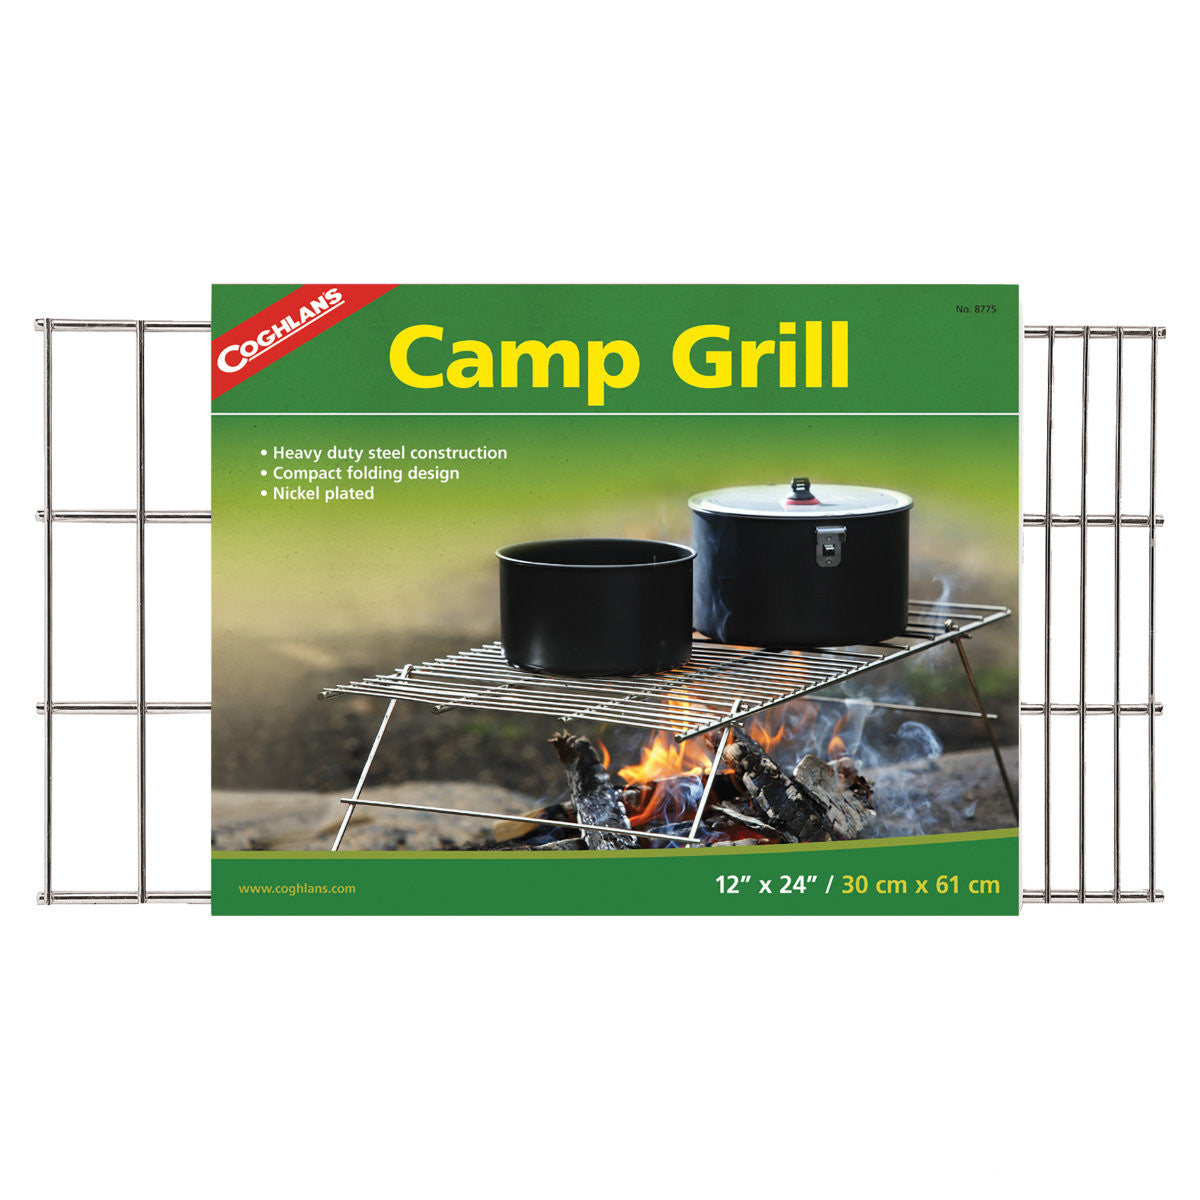 Camp Grill – Coghlan's